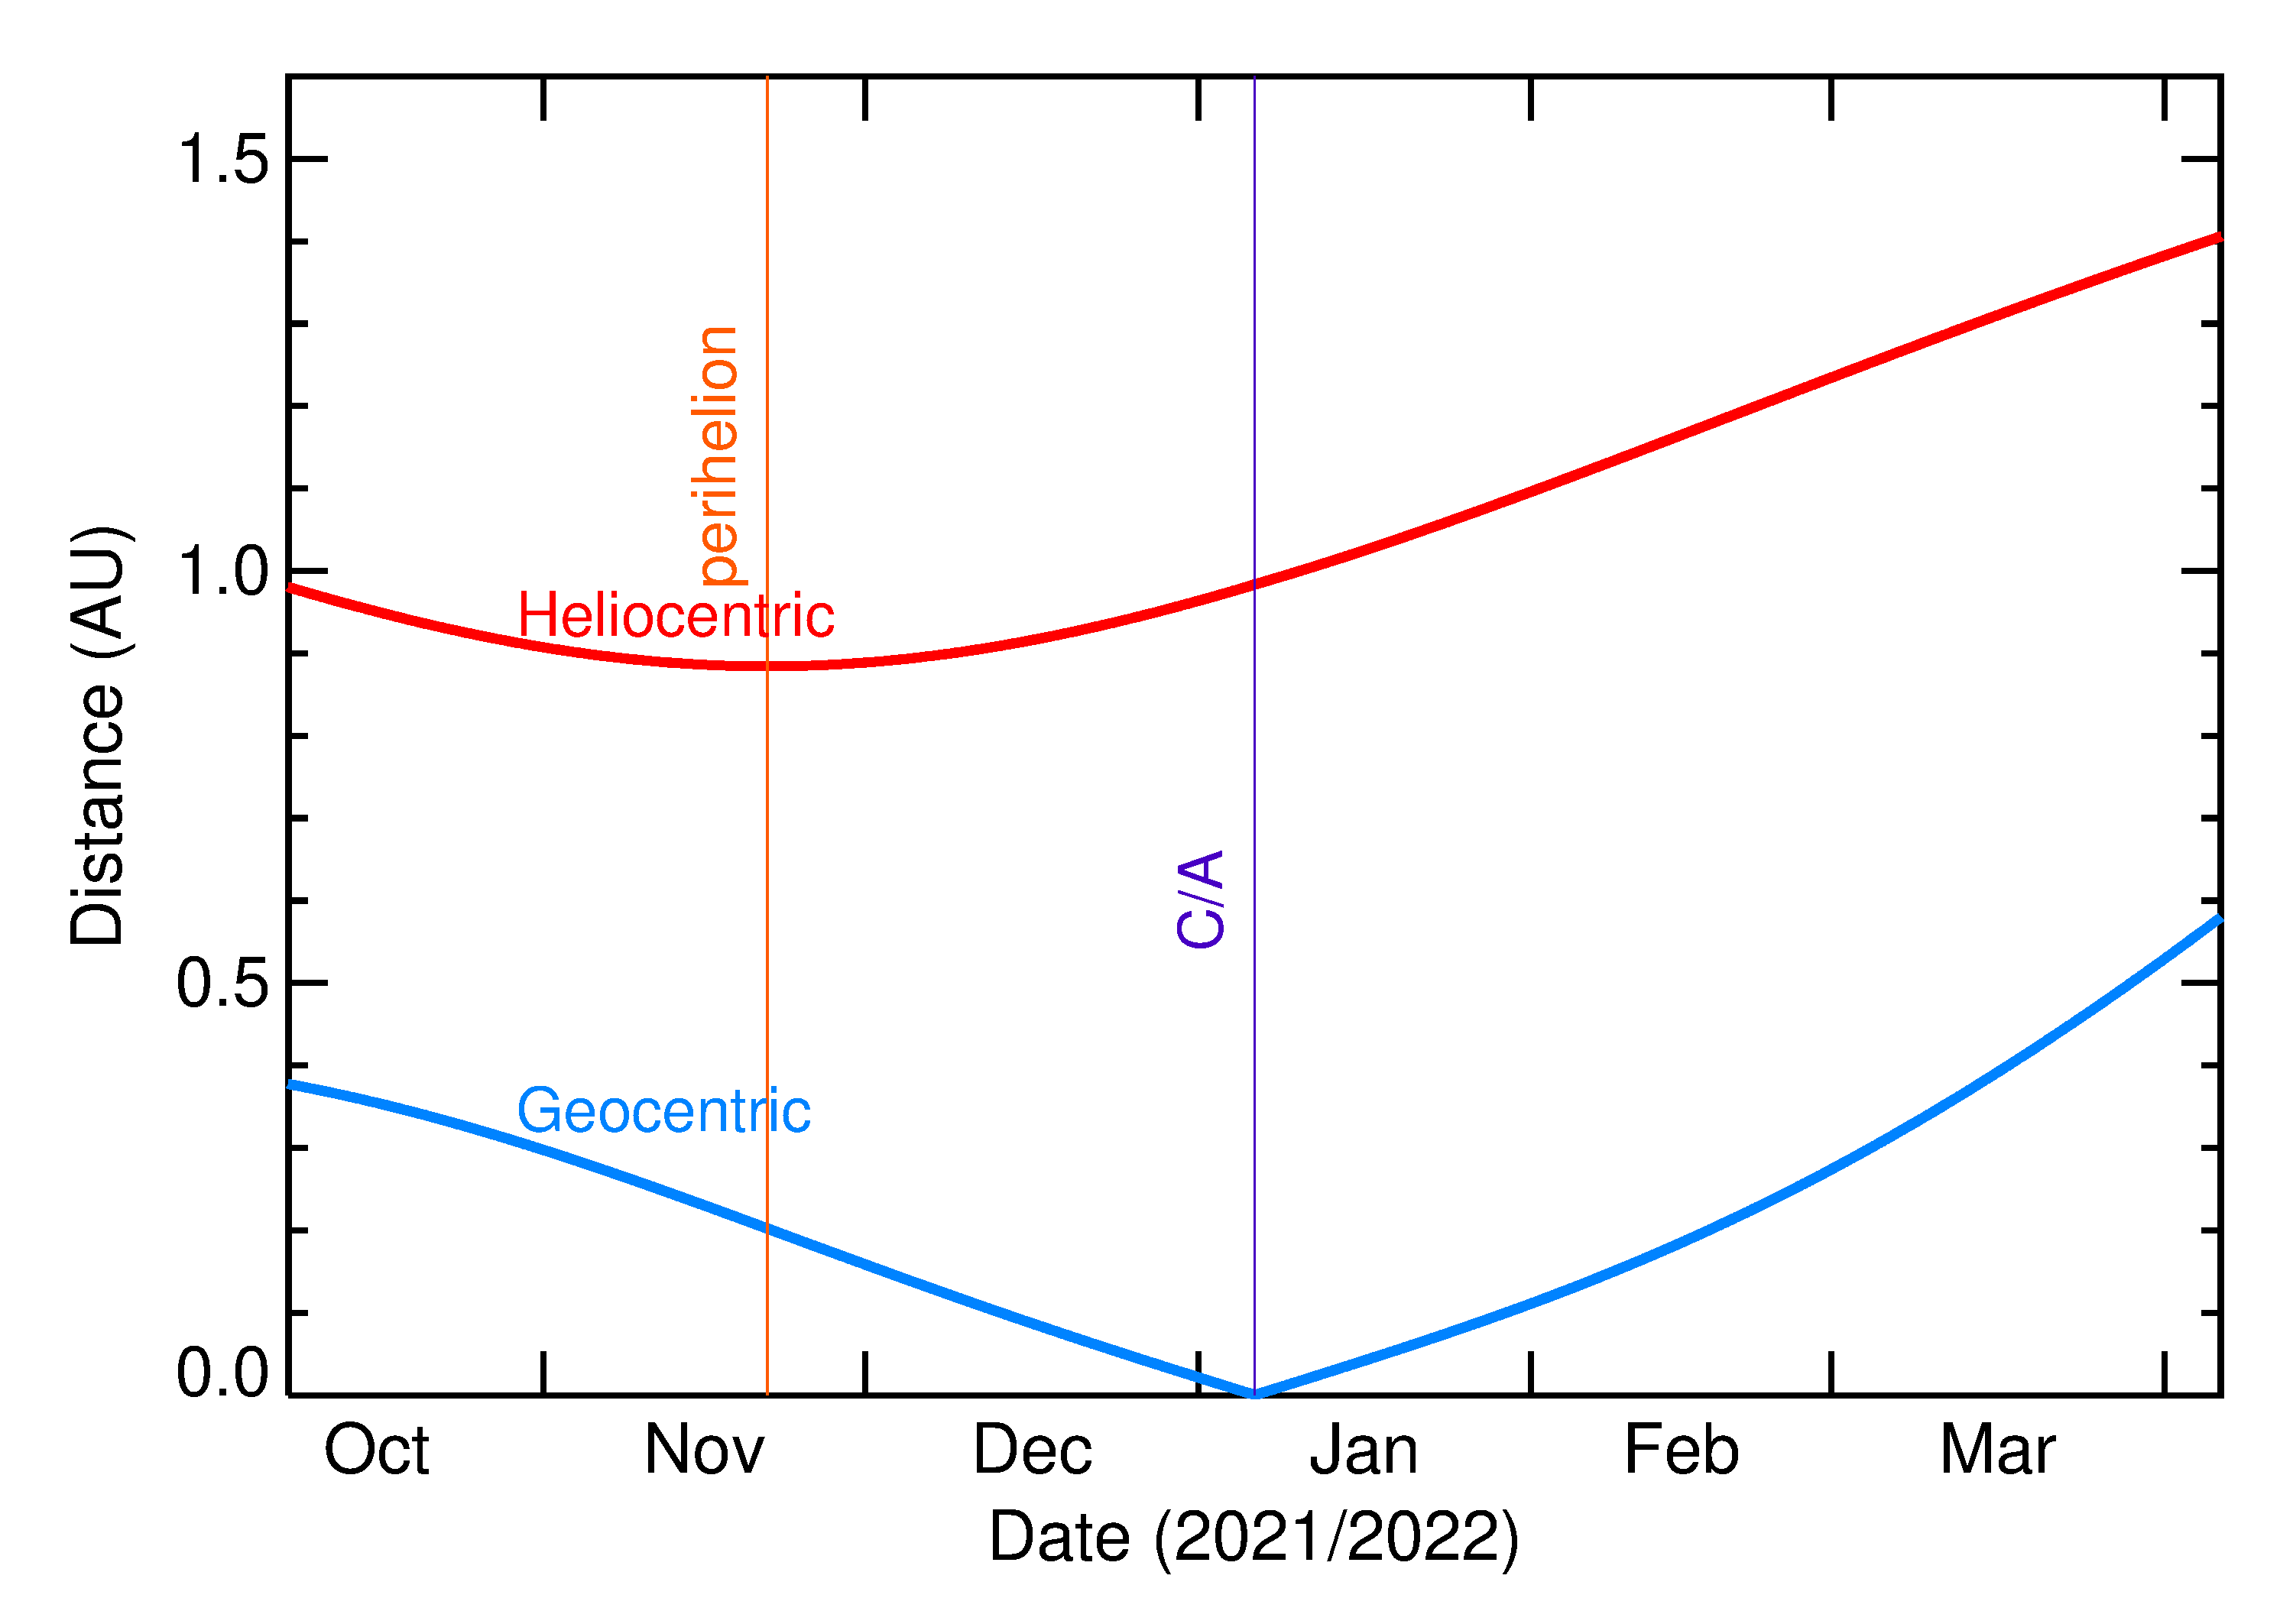 Heliocentric and Geocentric Distances of 2022 AV13 in the months around closest approach